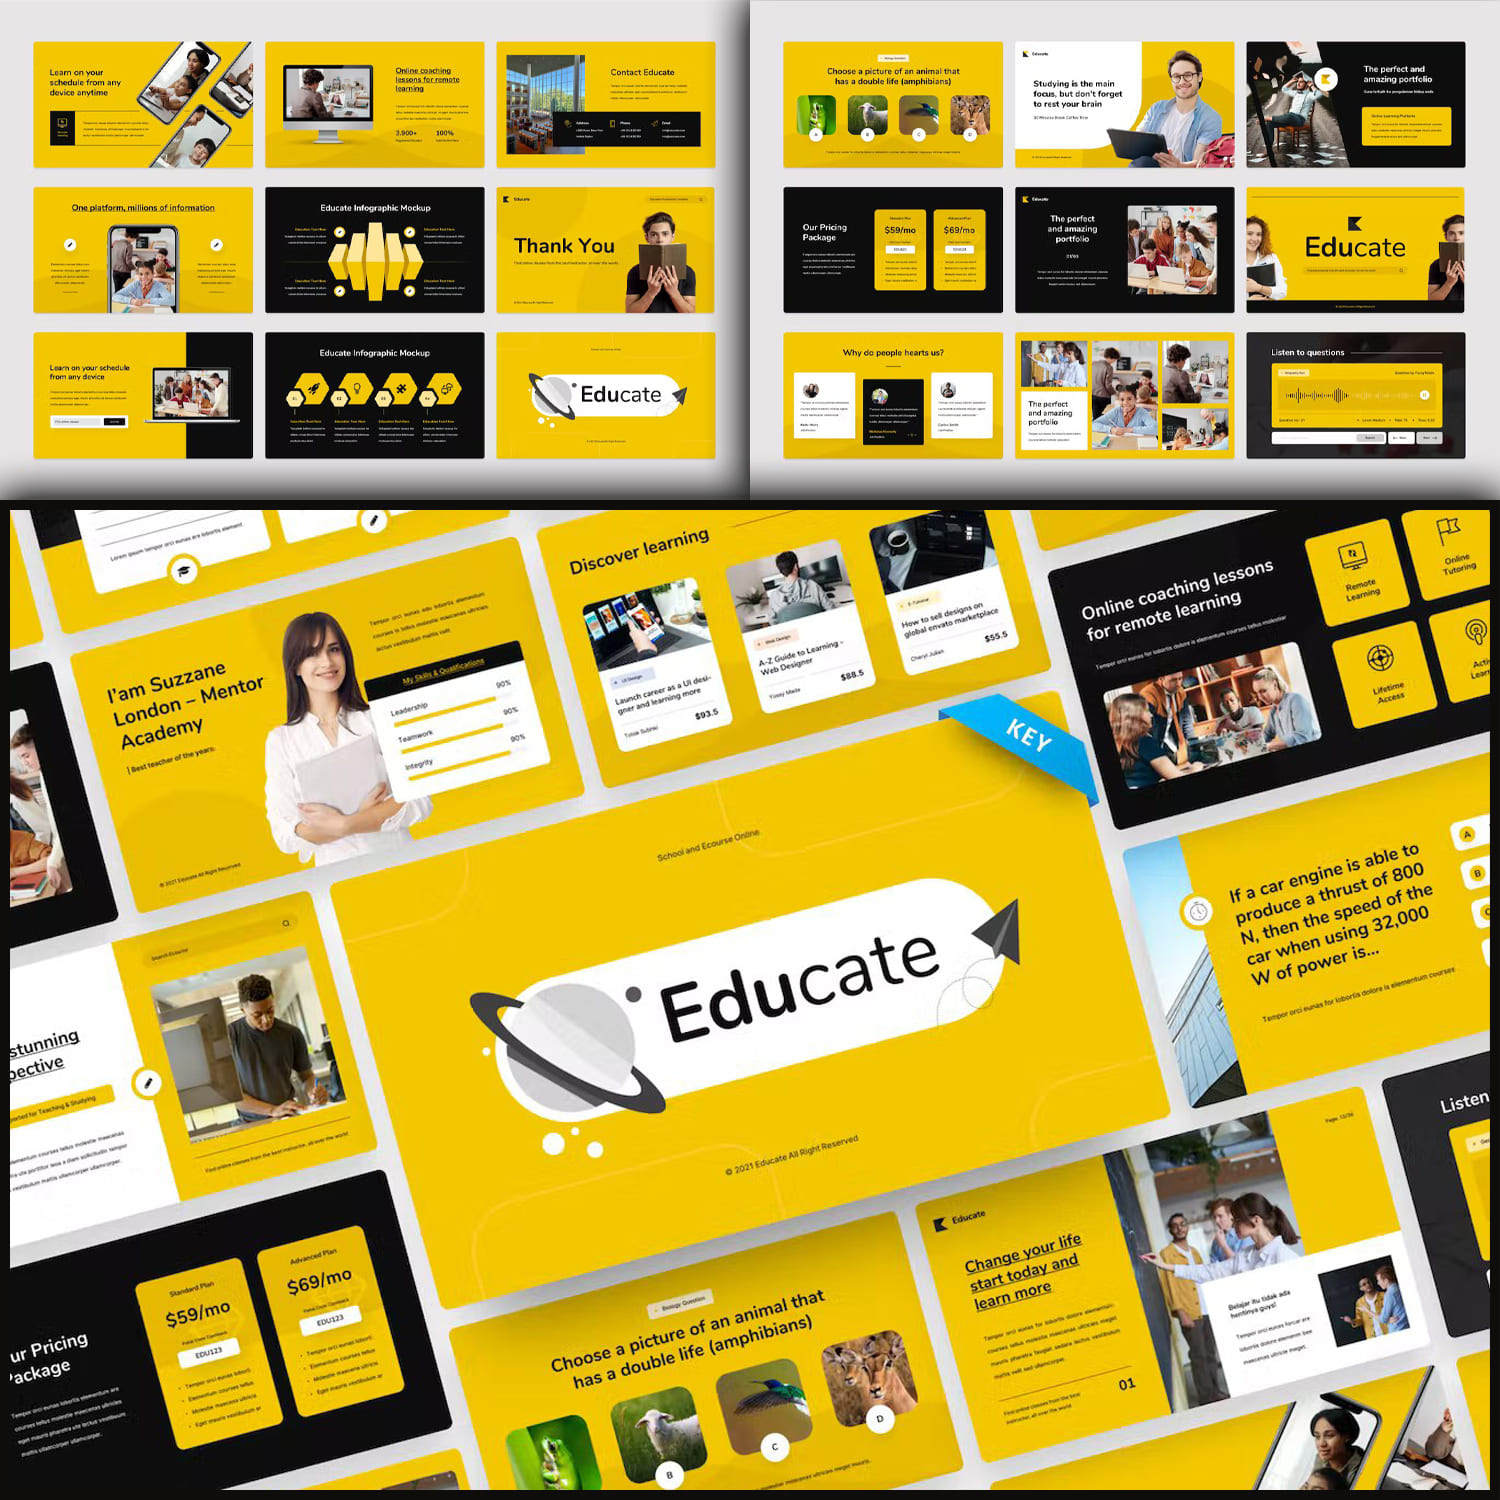 Set of images of exquisite presentation template slides in yellow and black colors.